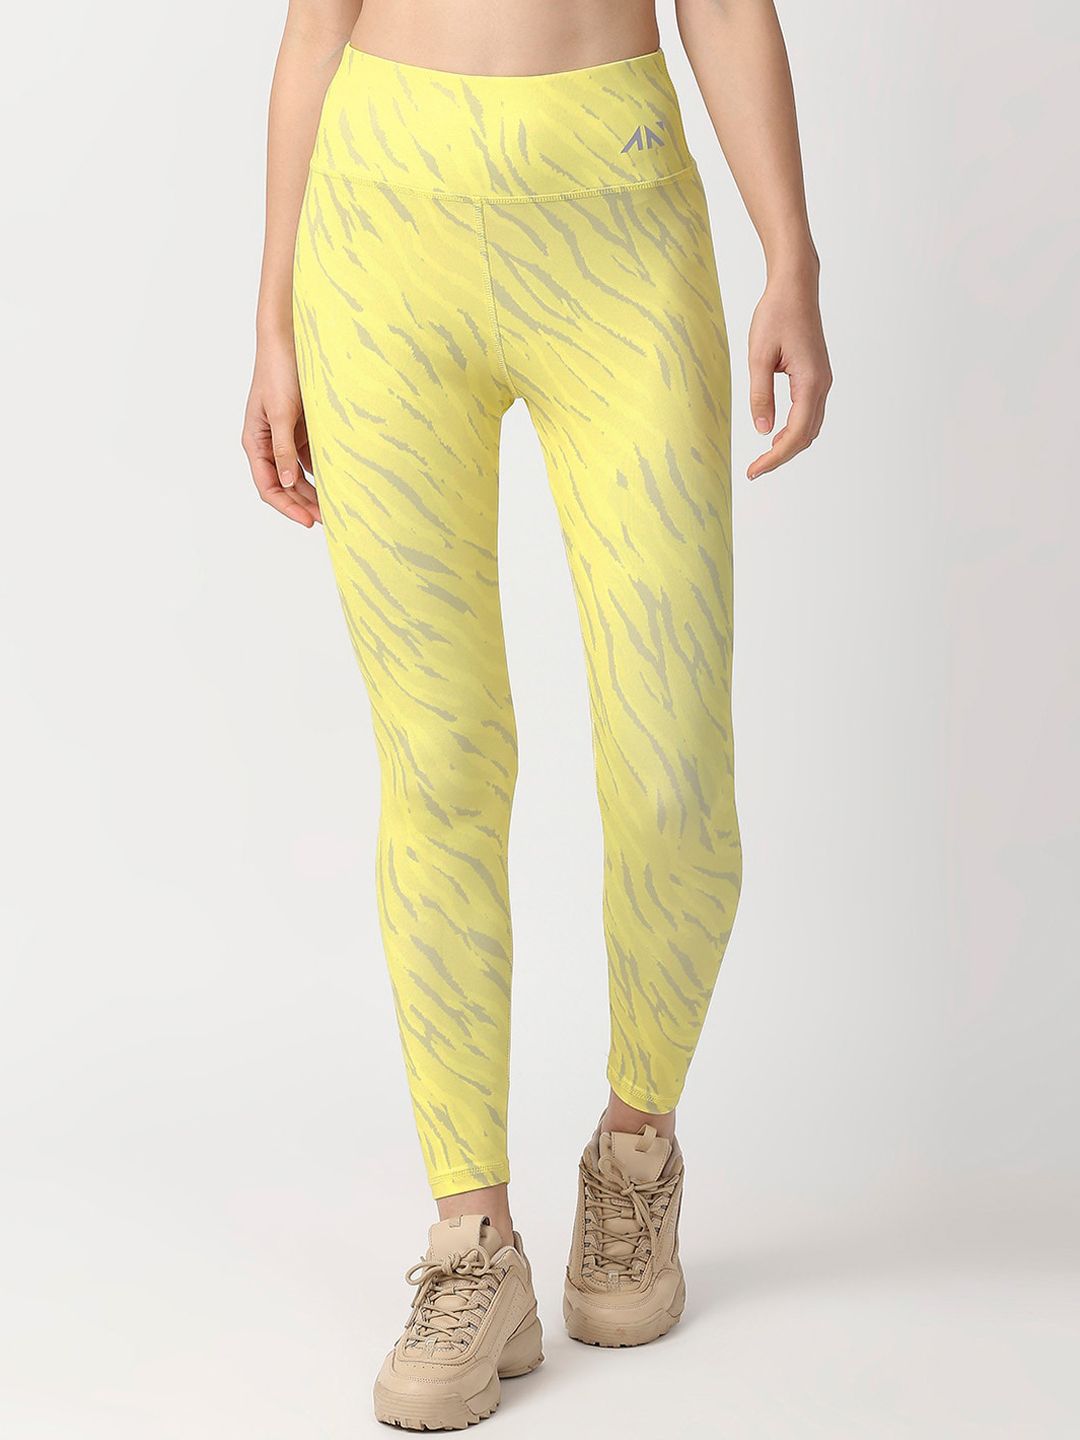 AESTHETIC NATION Women Yellow Printed Dry Fit Tights Price in India